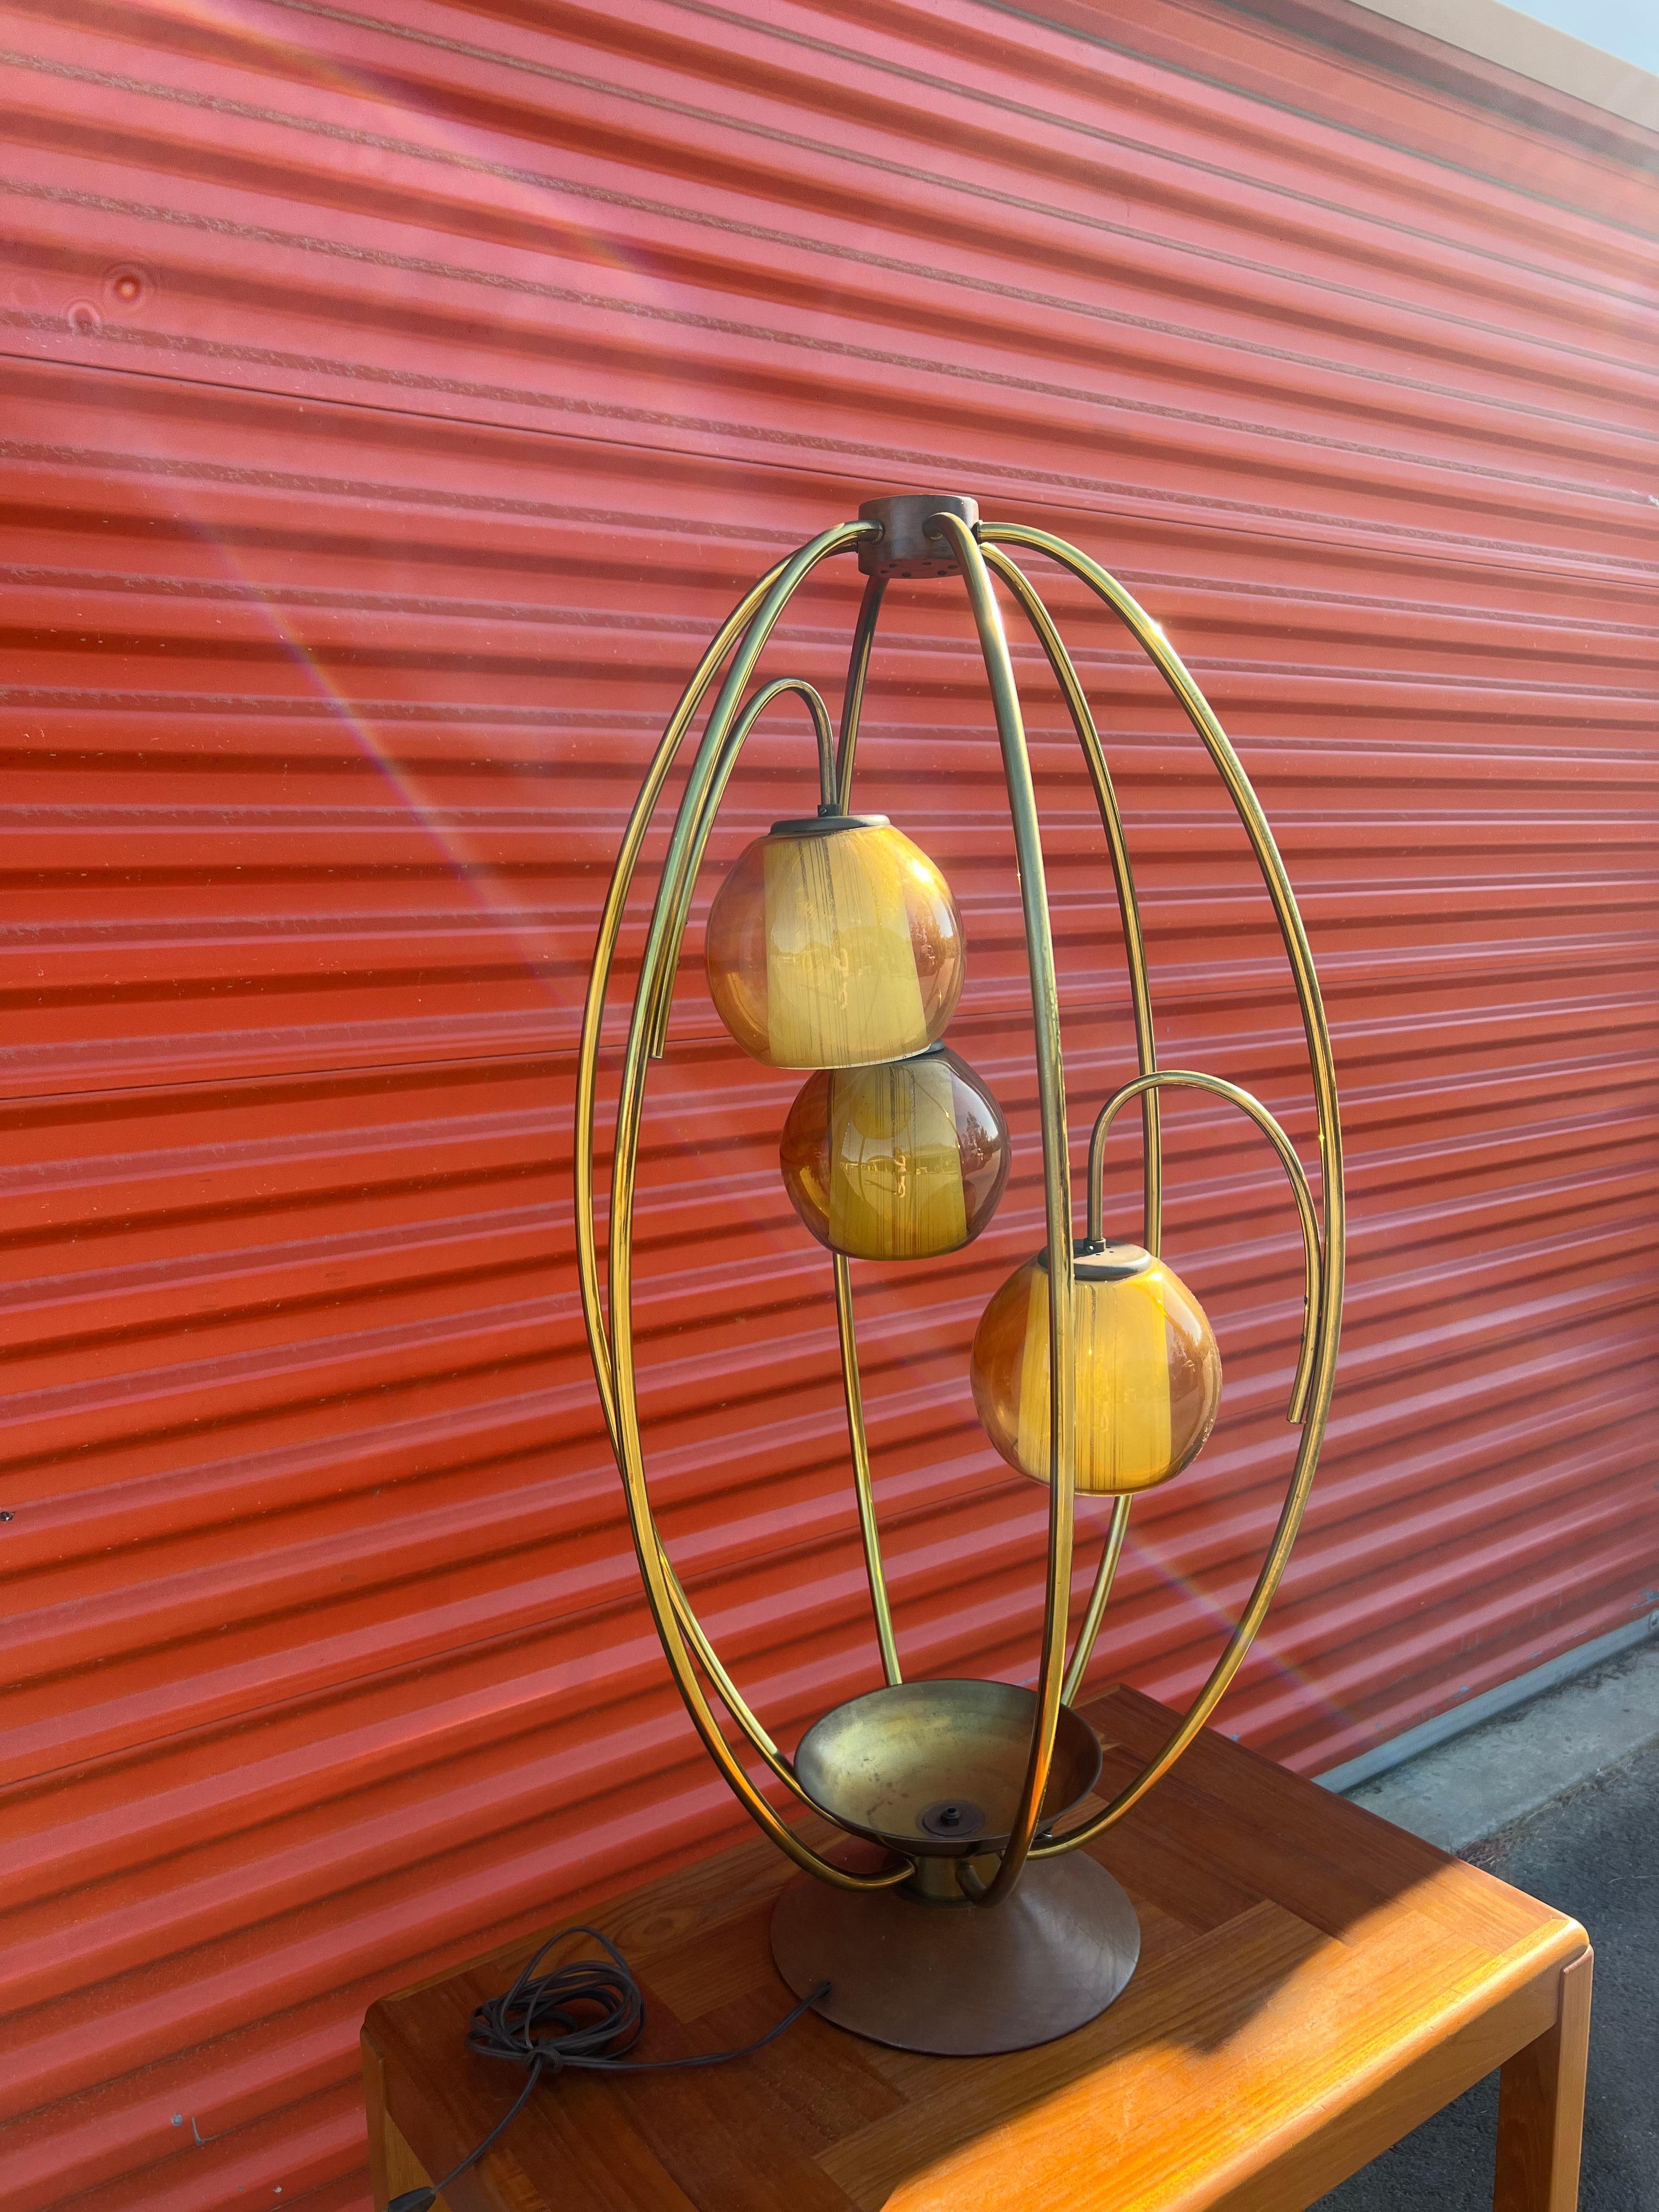 Unique Mid-Century Modern oval brass ‘bird cage’ table lamp with three glass globes. Some light wear and patina to the brass from age. Attributed to Modeline.